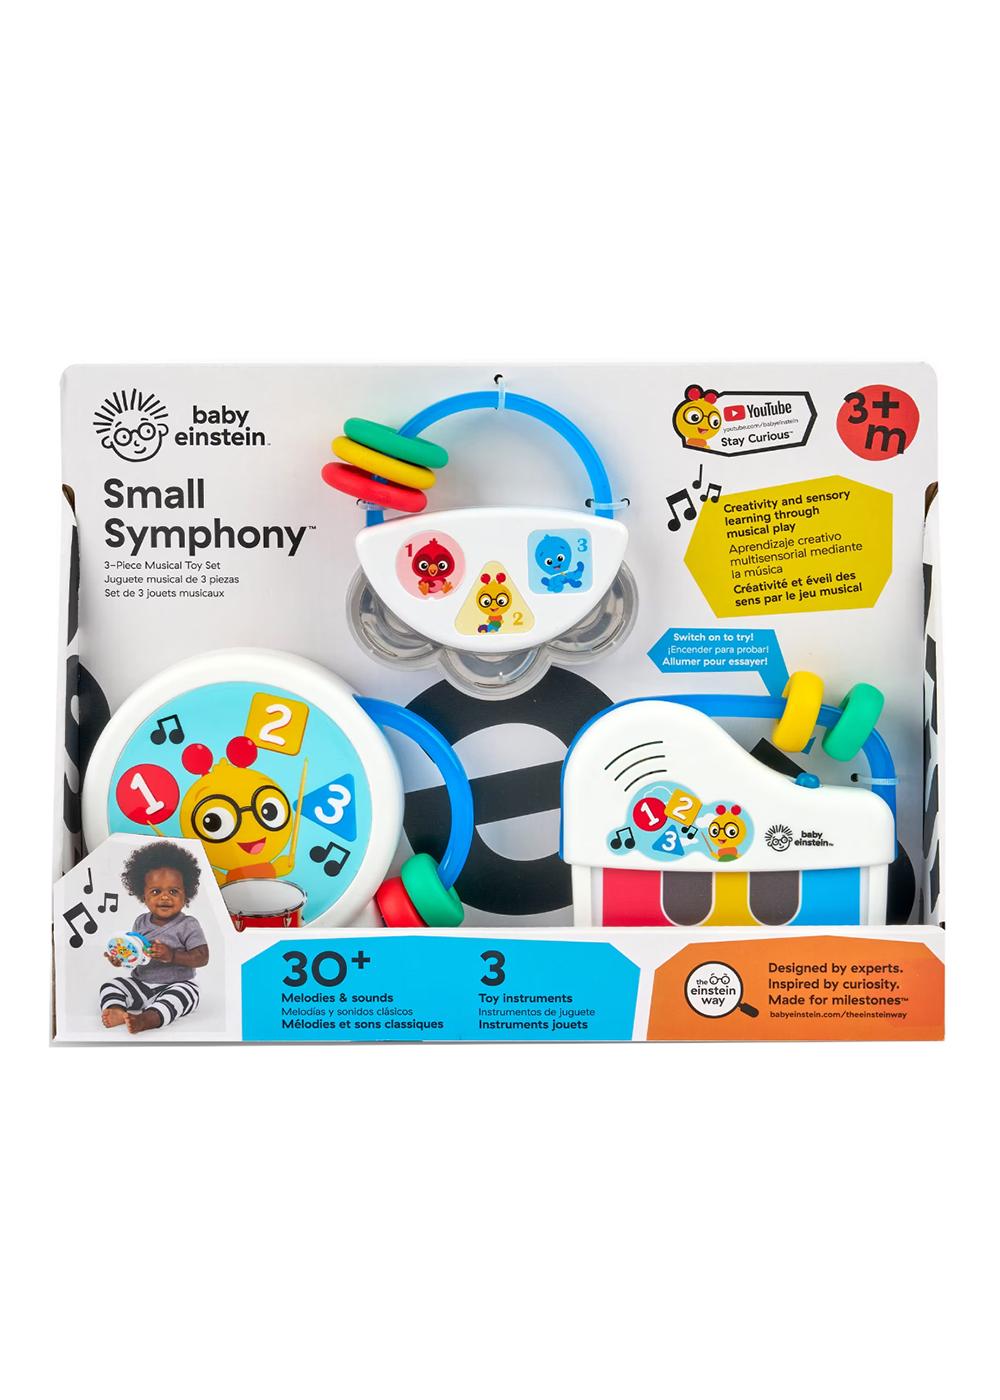 Baby Einstein Small Symphony Musical Toy Set; image 1 of 2